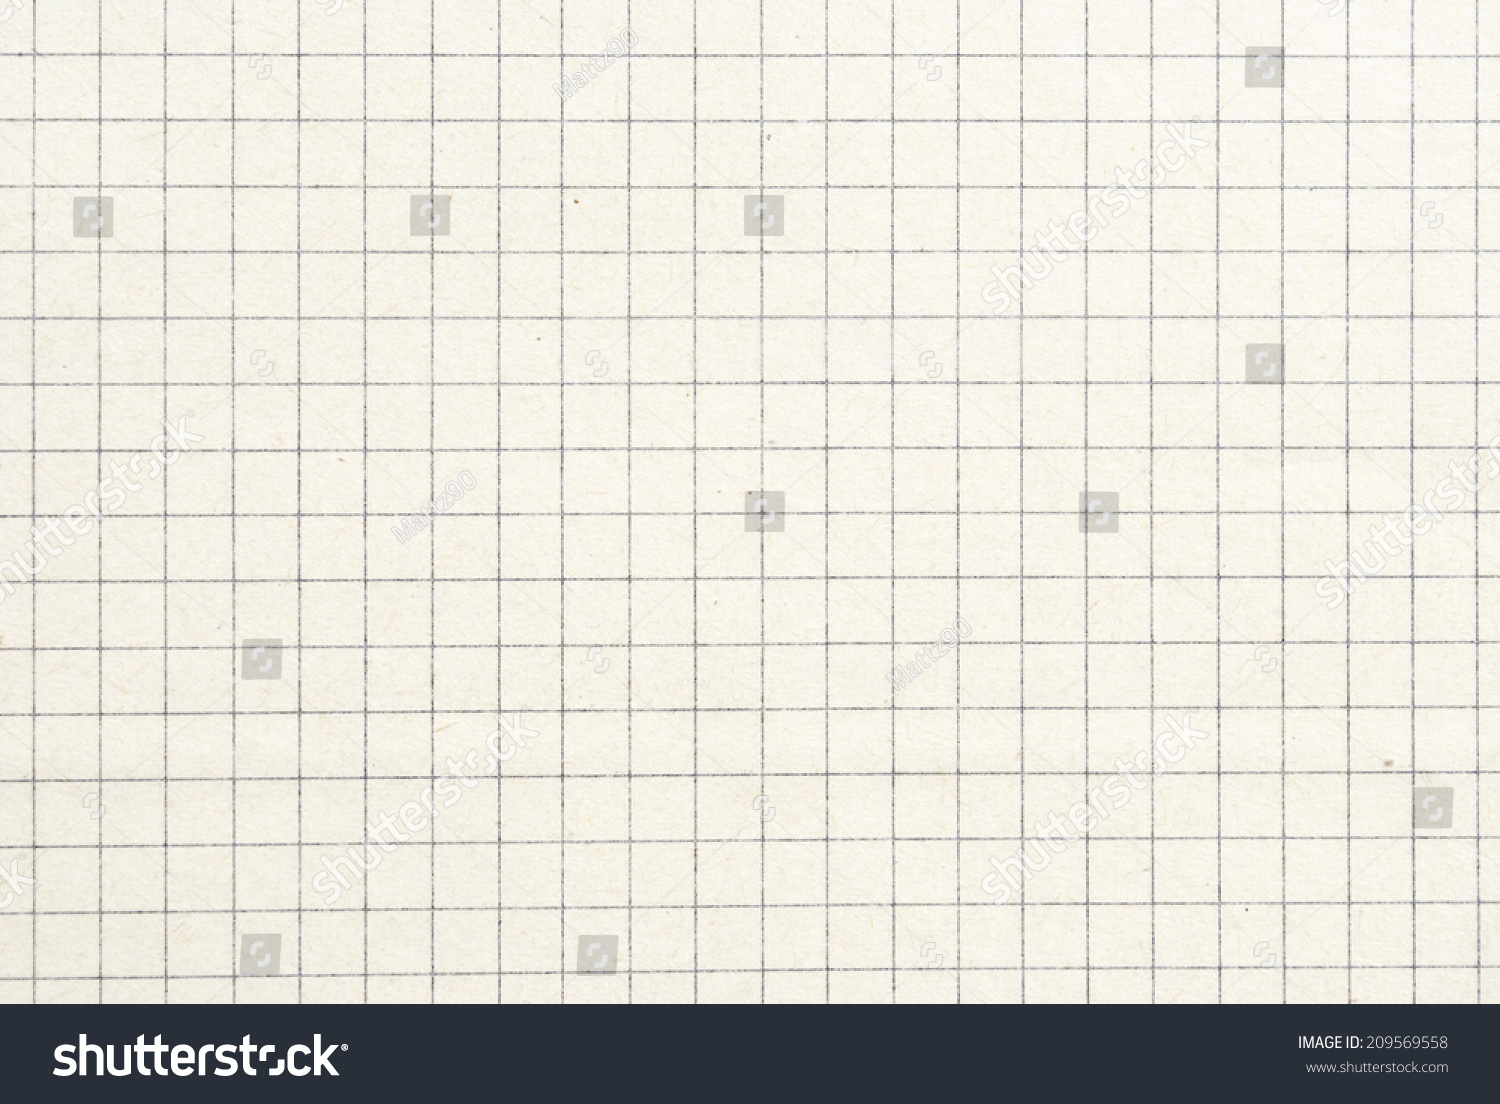 Checked old paper background or texture #209569558